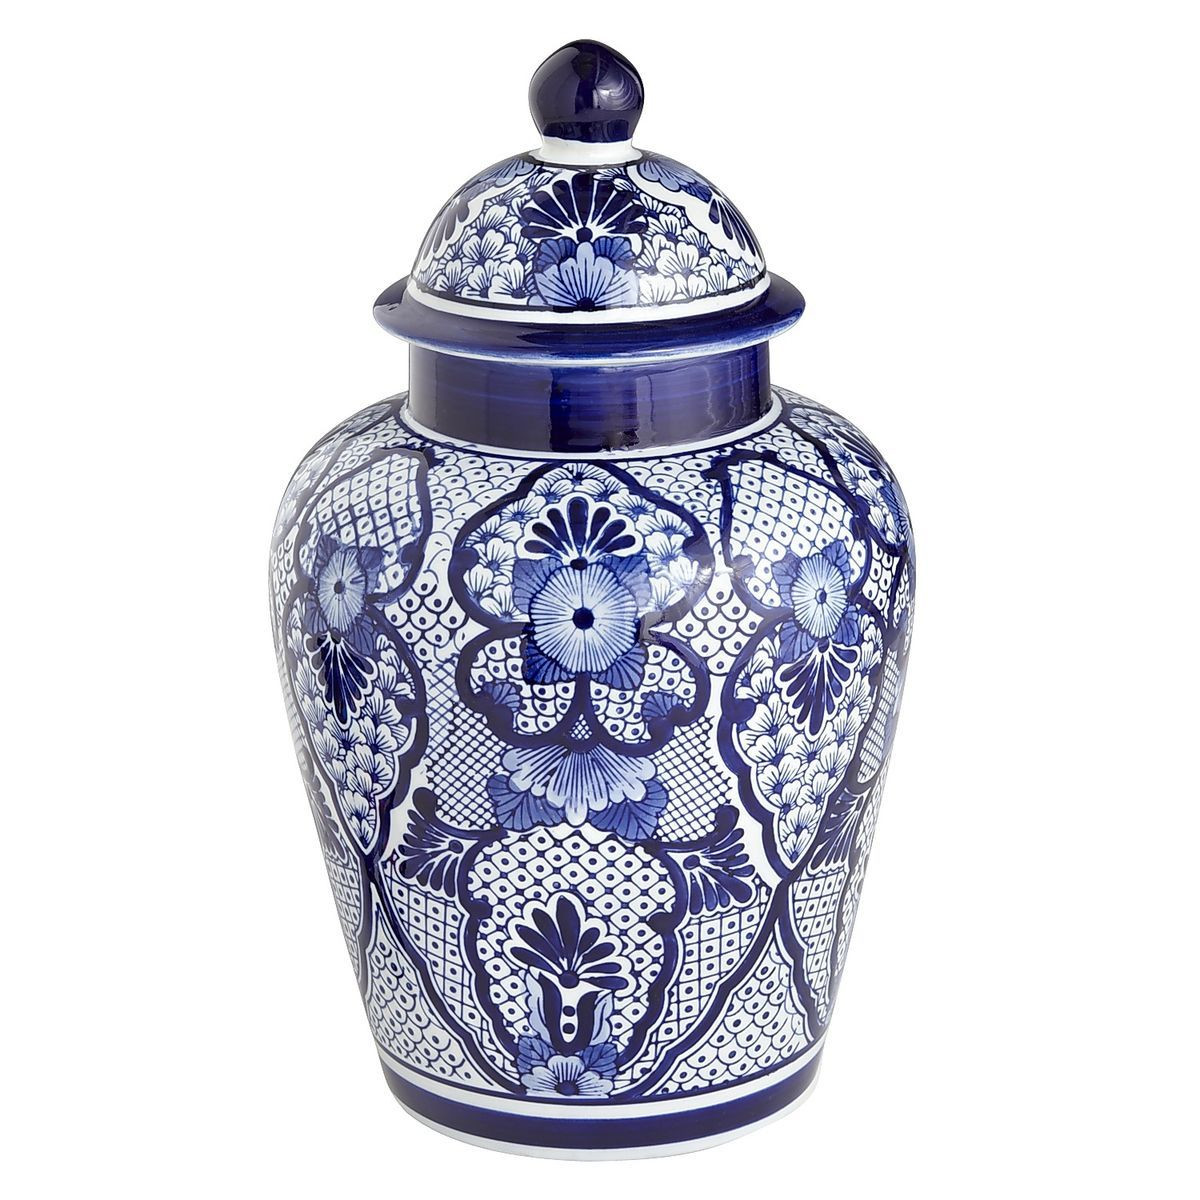 32 inch floor vase of blue white temple jar pier 1 imports the blue house down the throughout blue white temple jar pier 1 imports